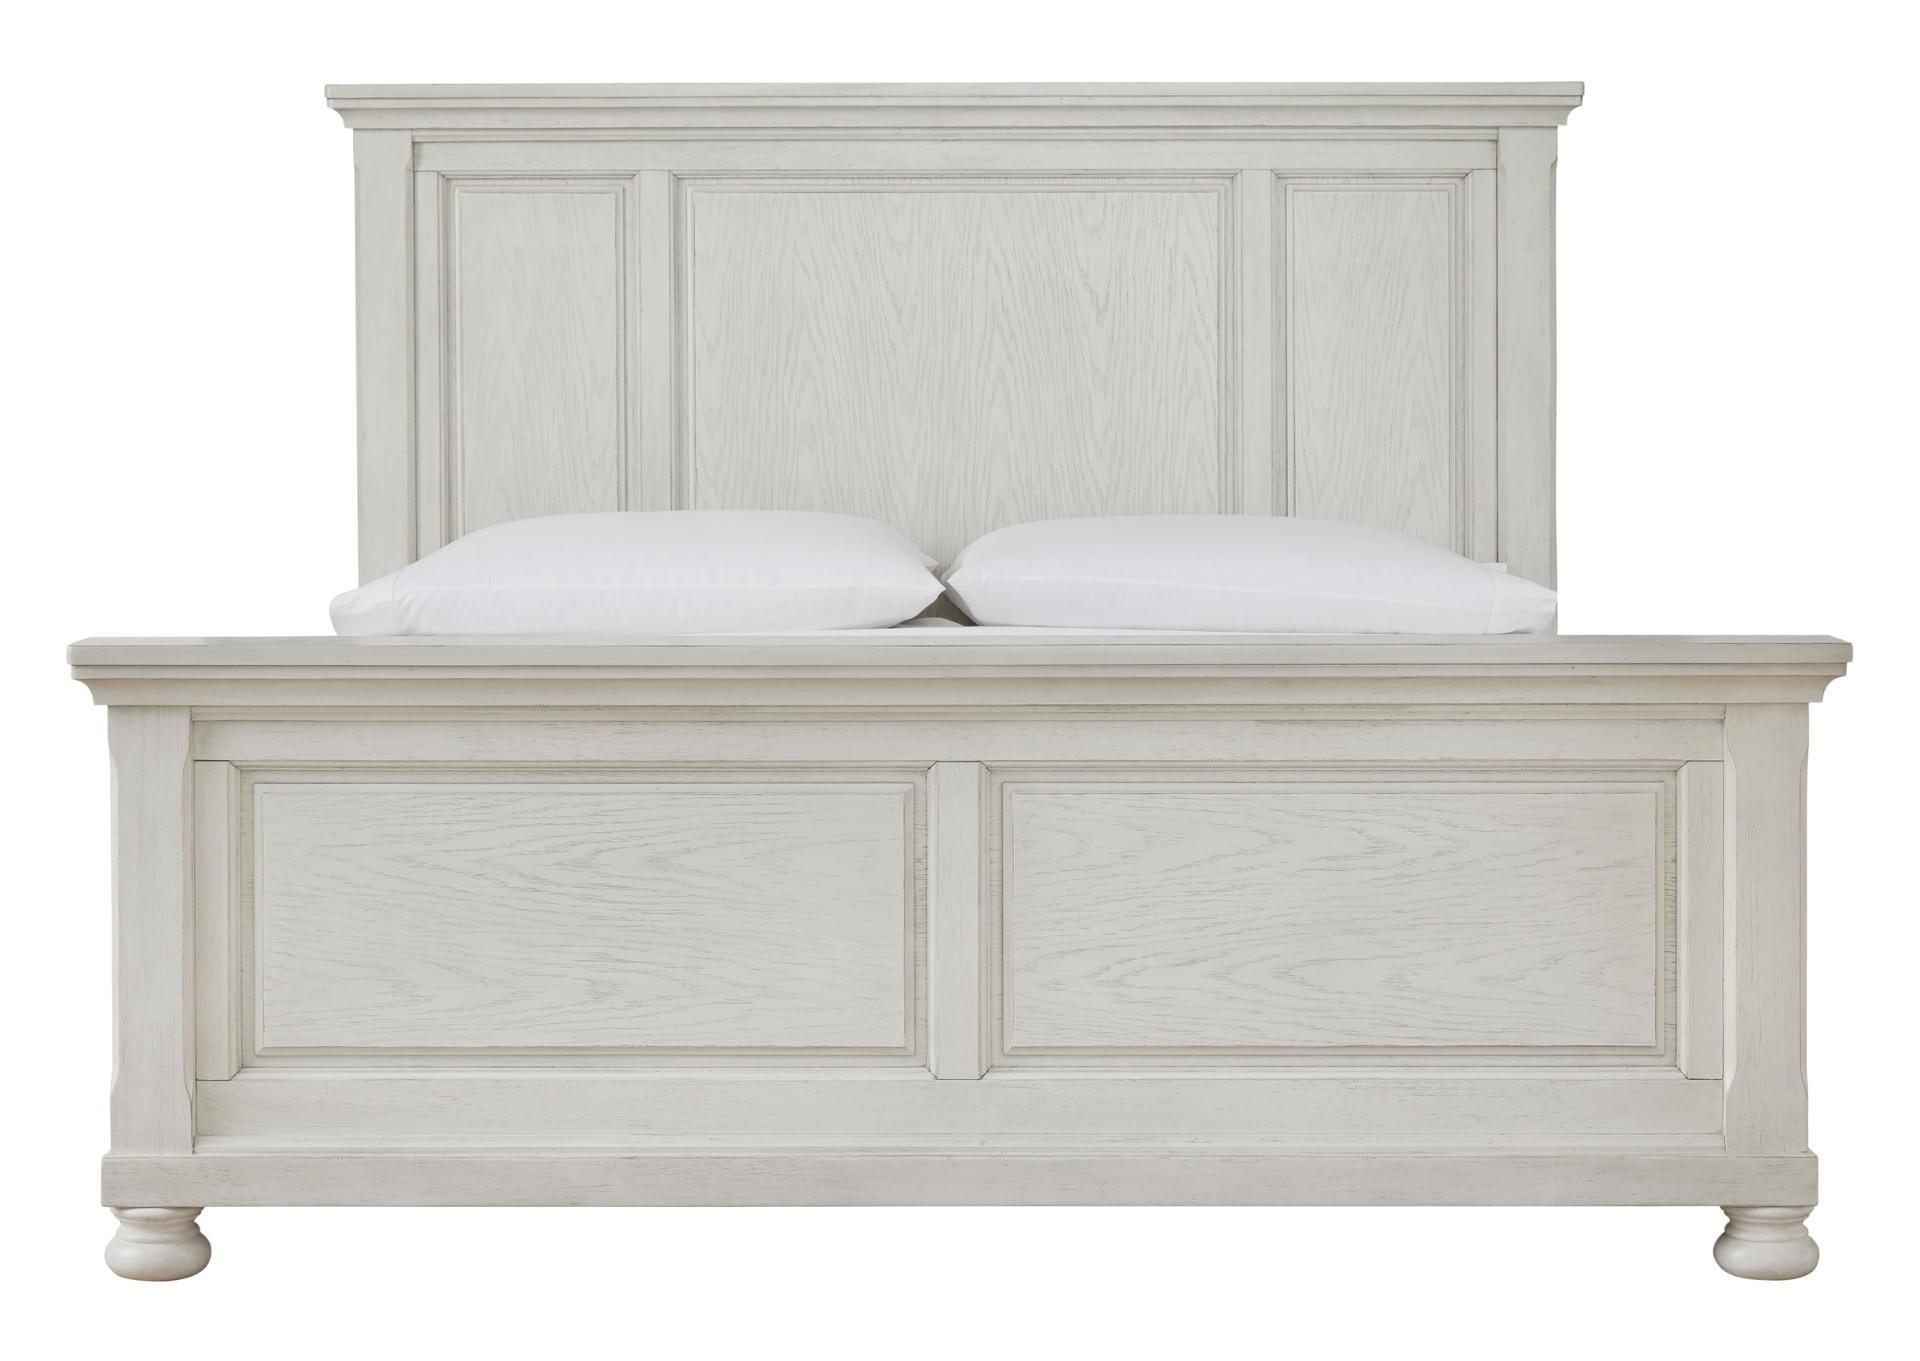 ROBBINSDALE KING PANEL BED